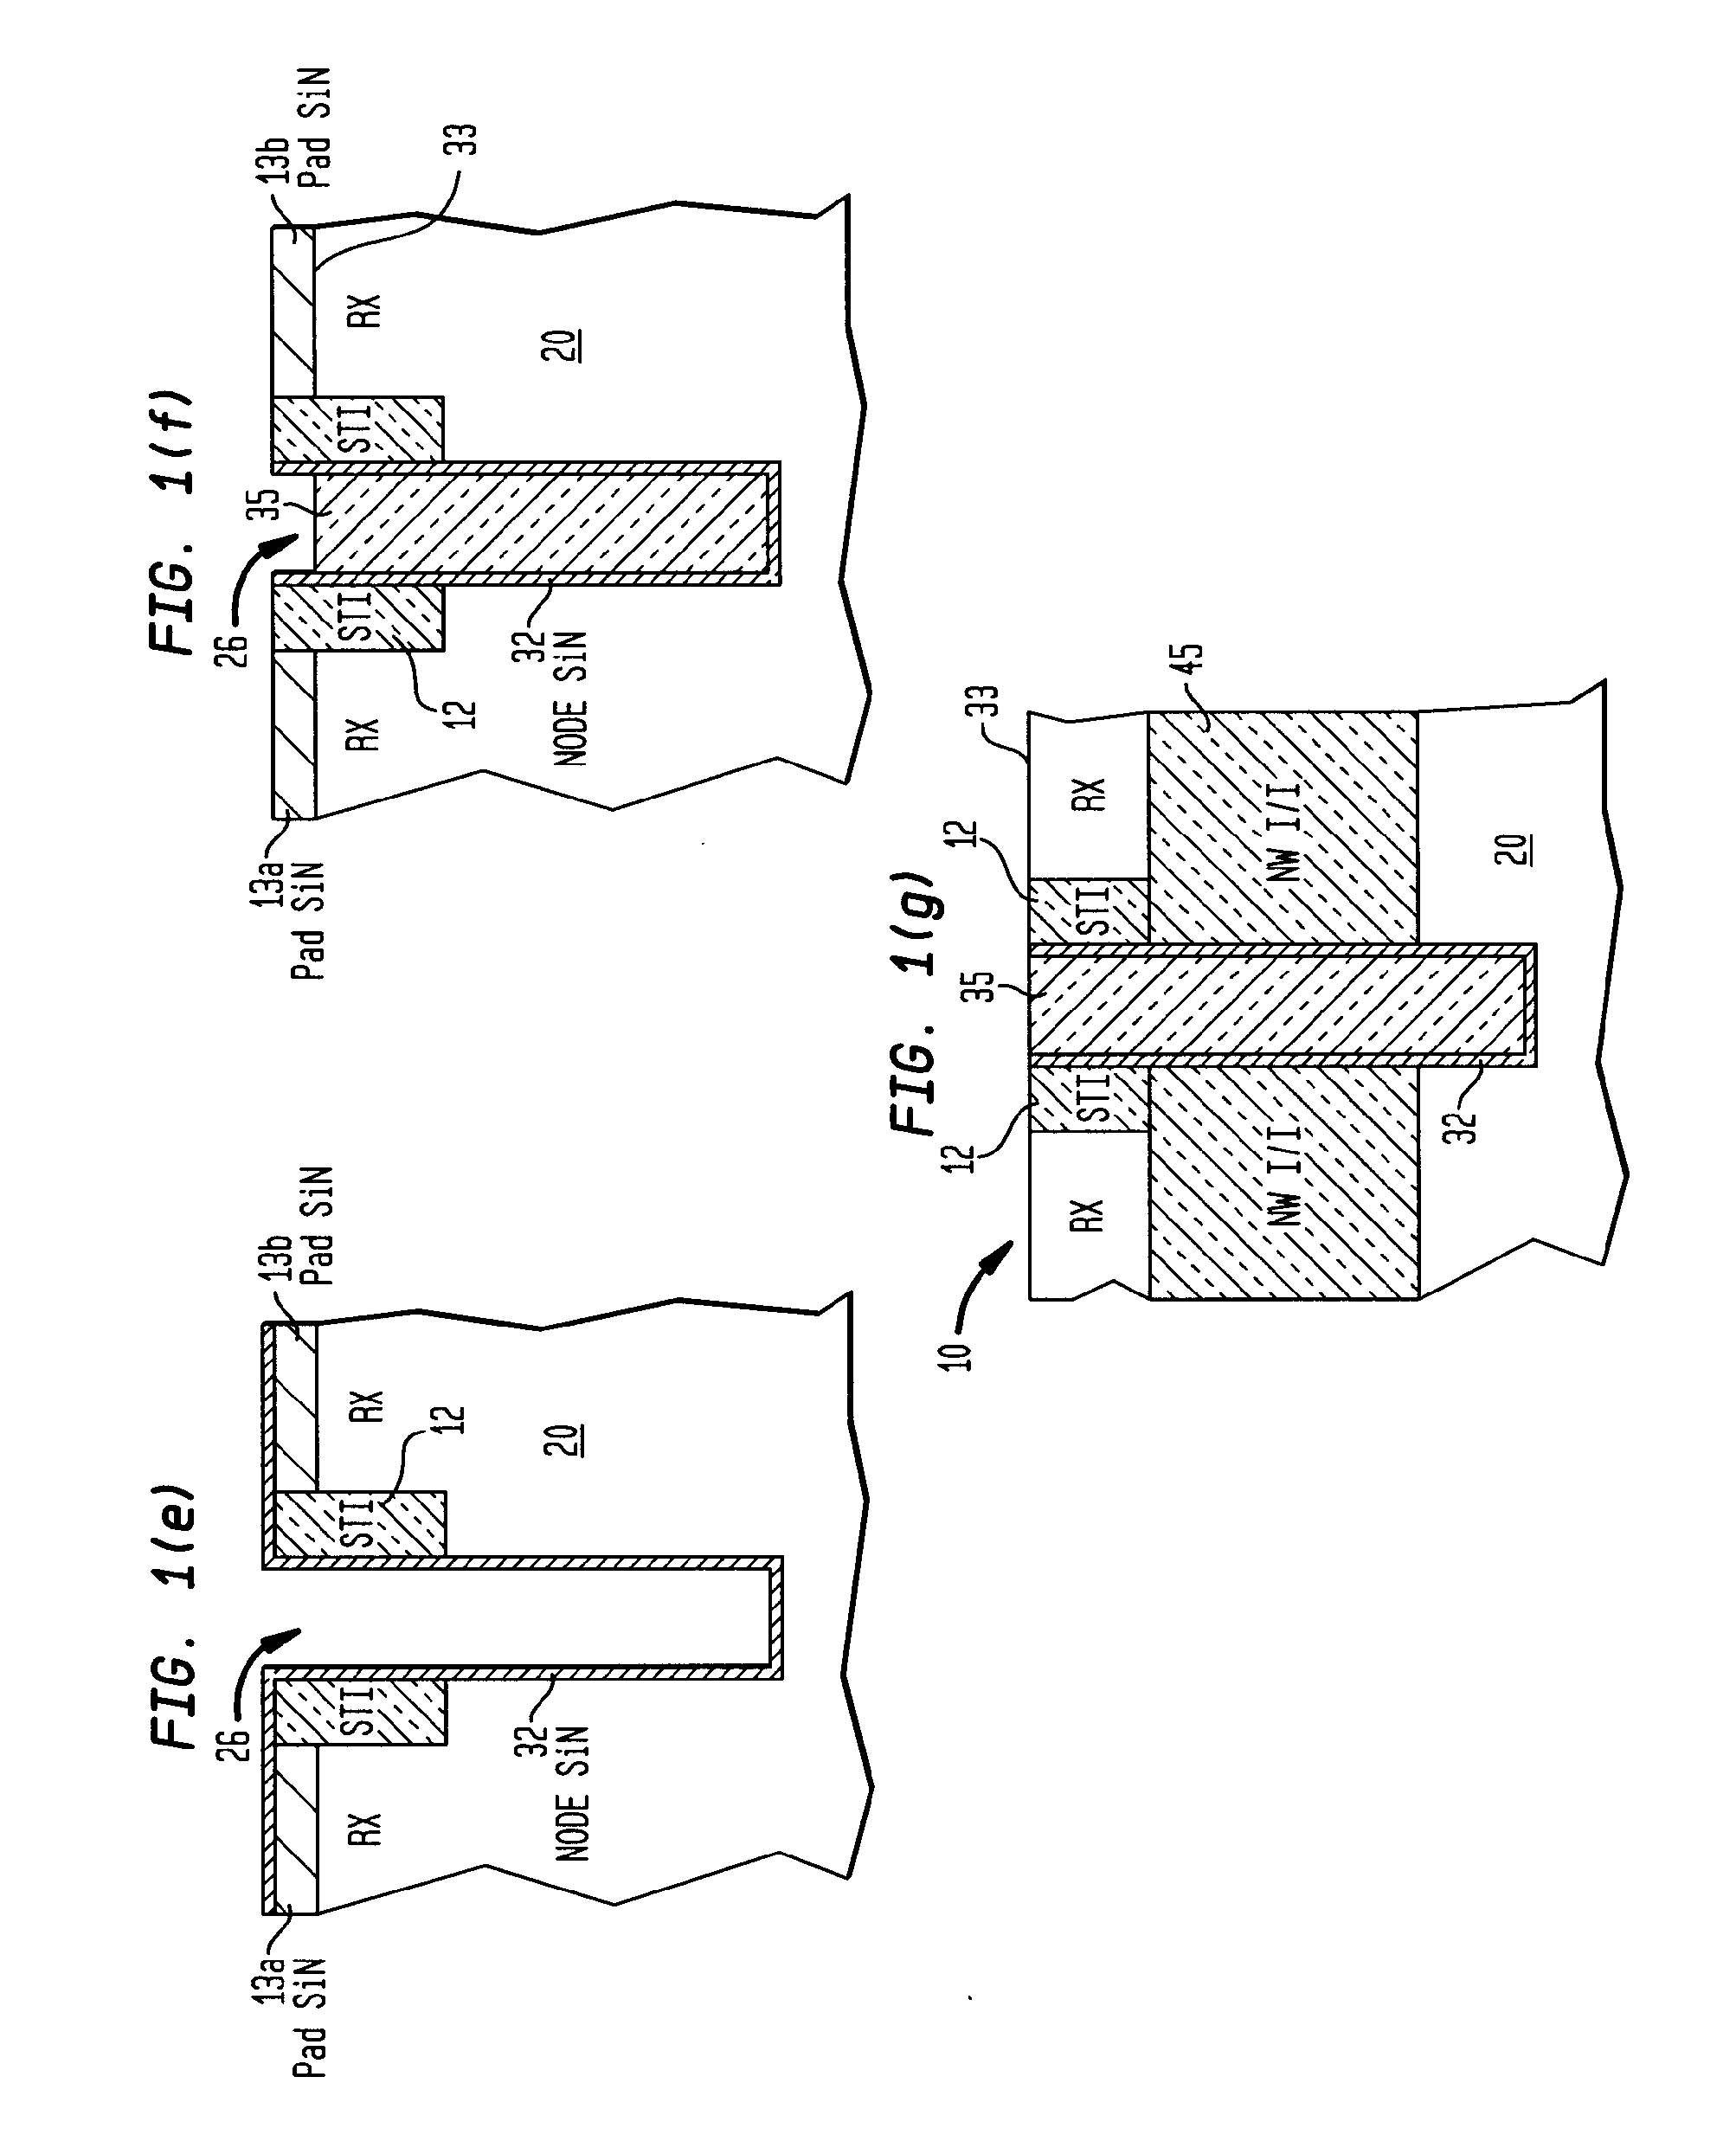 Low-Cost Deep Trench Decoupling Capacitor Device and Process of Manufacture